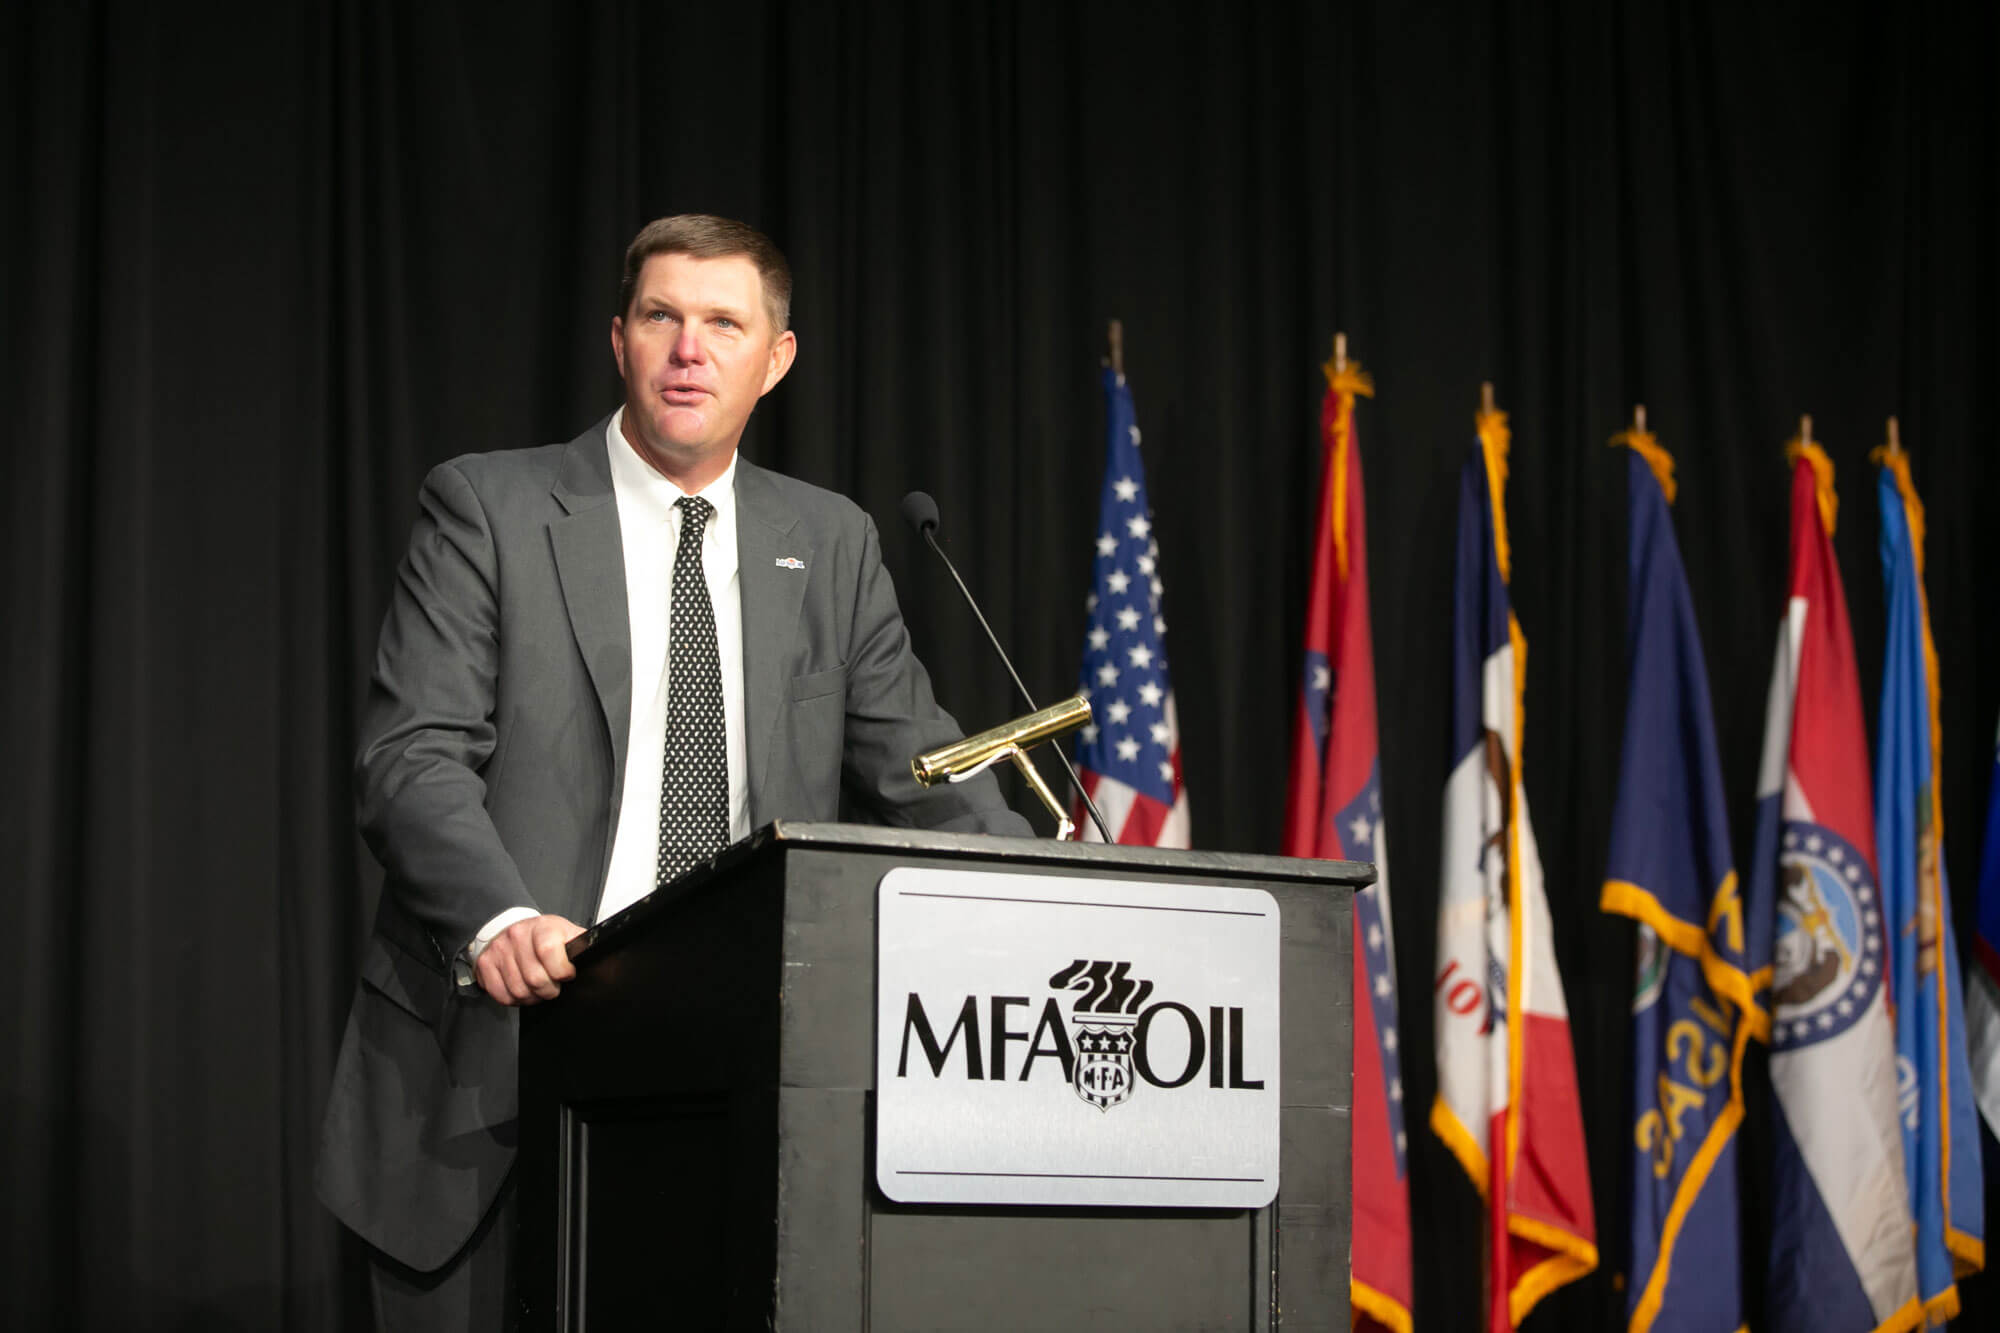 MFA Oil Board Chairman Glen Cope welcomed delegates to the company’s 92nd Annual Delegate meeting